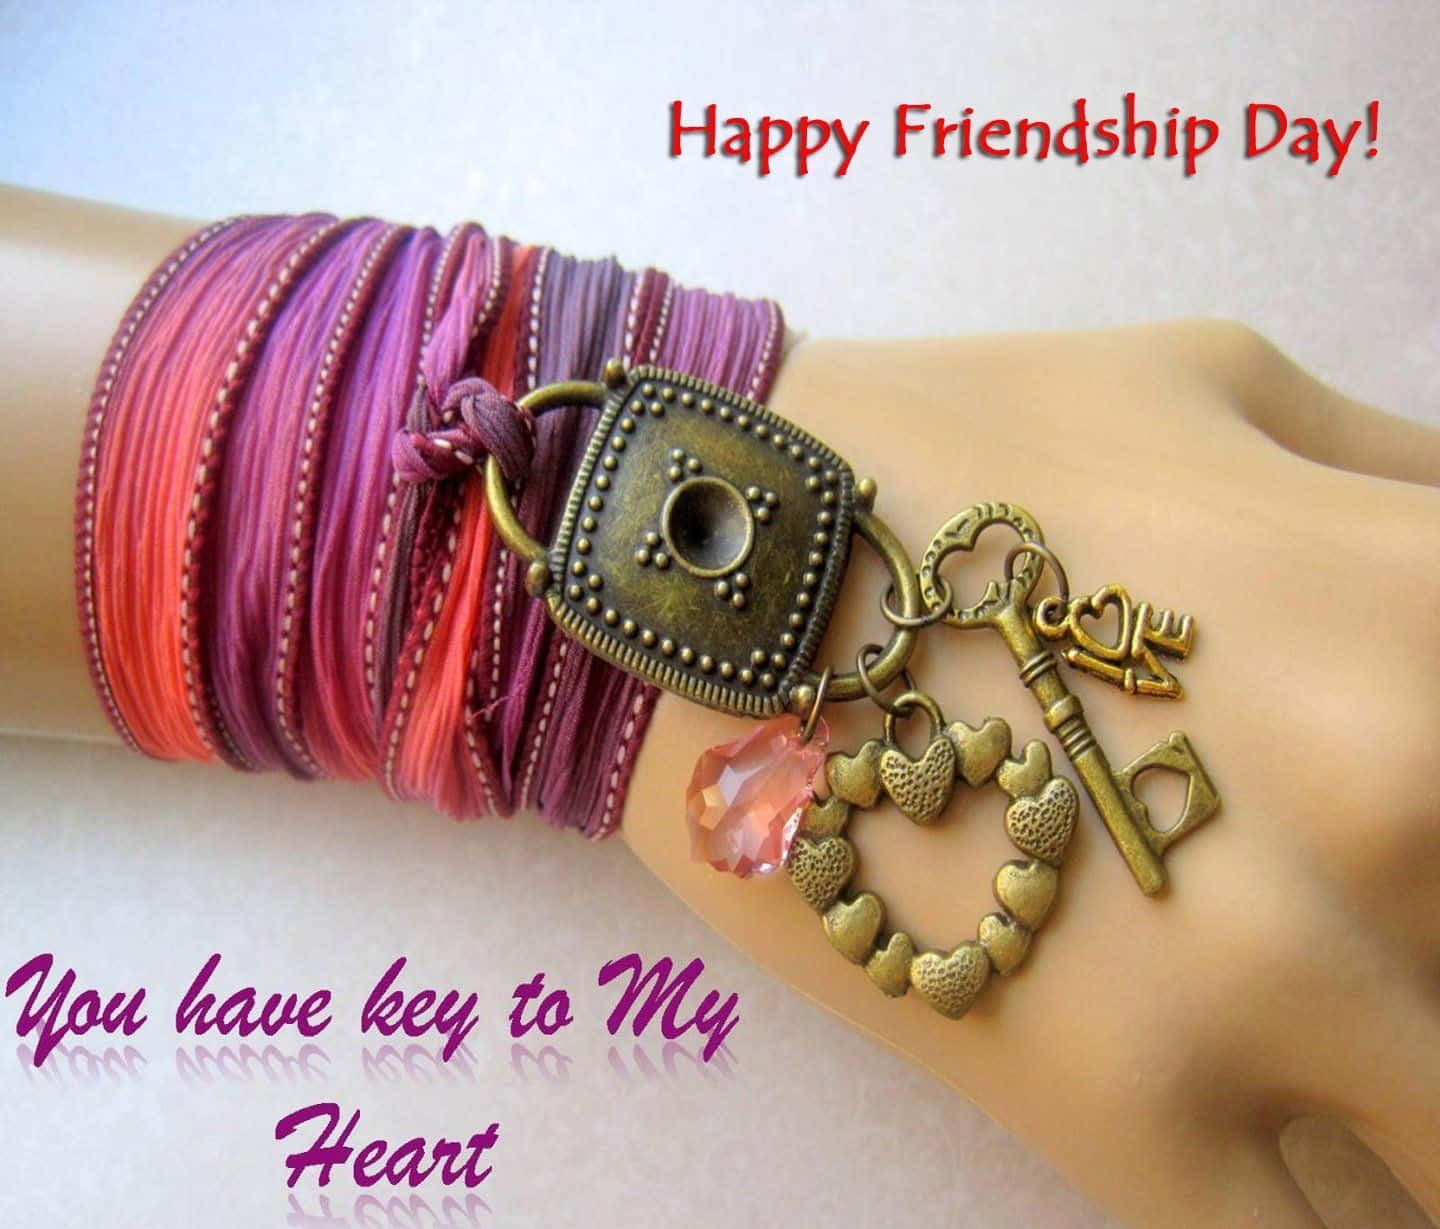 Celebrate Friendship Day with your friends!